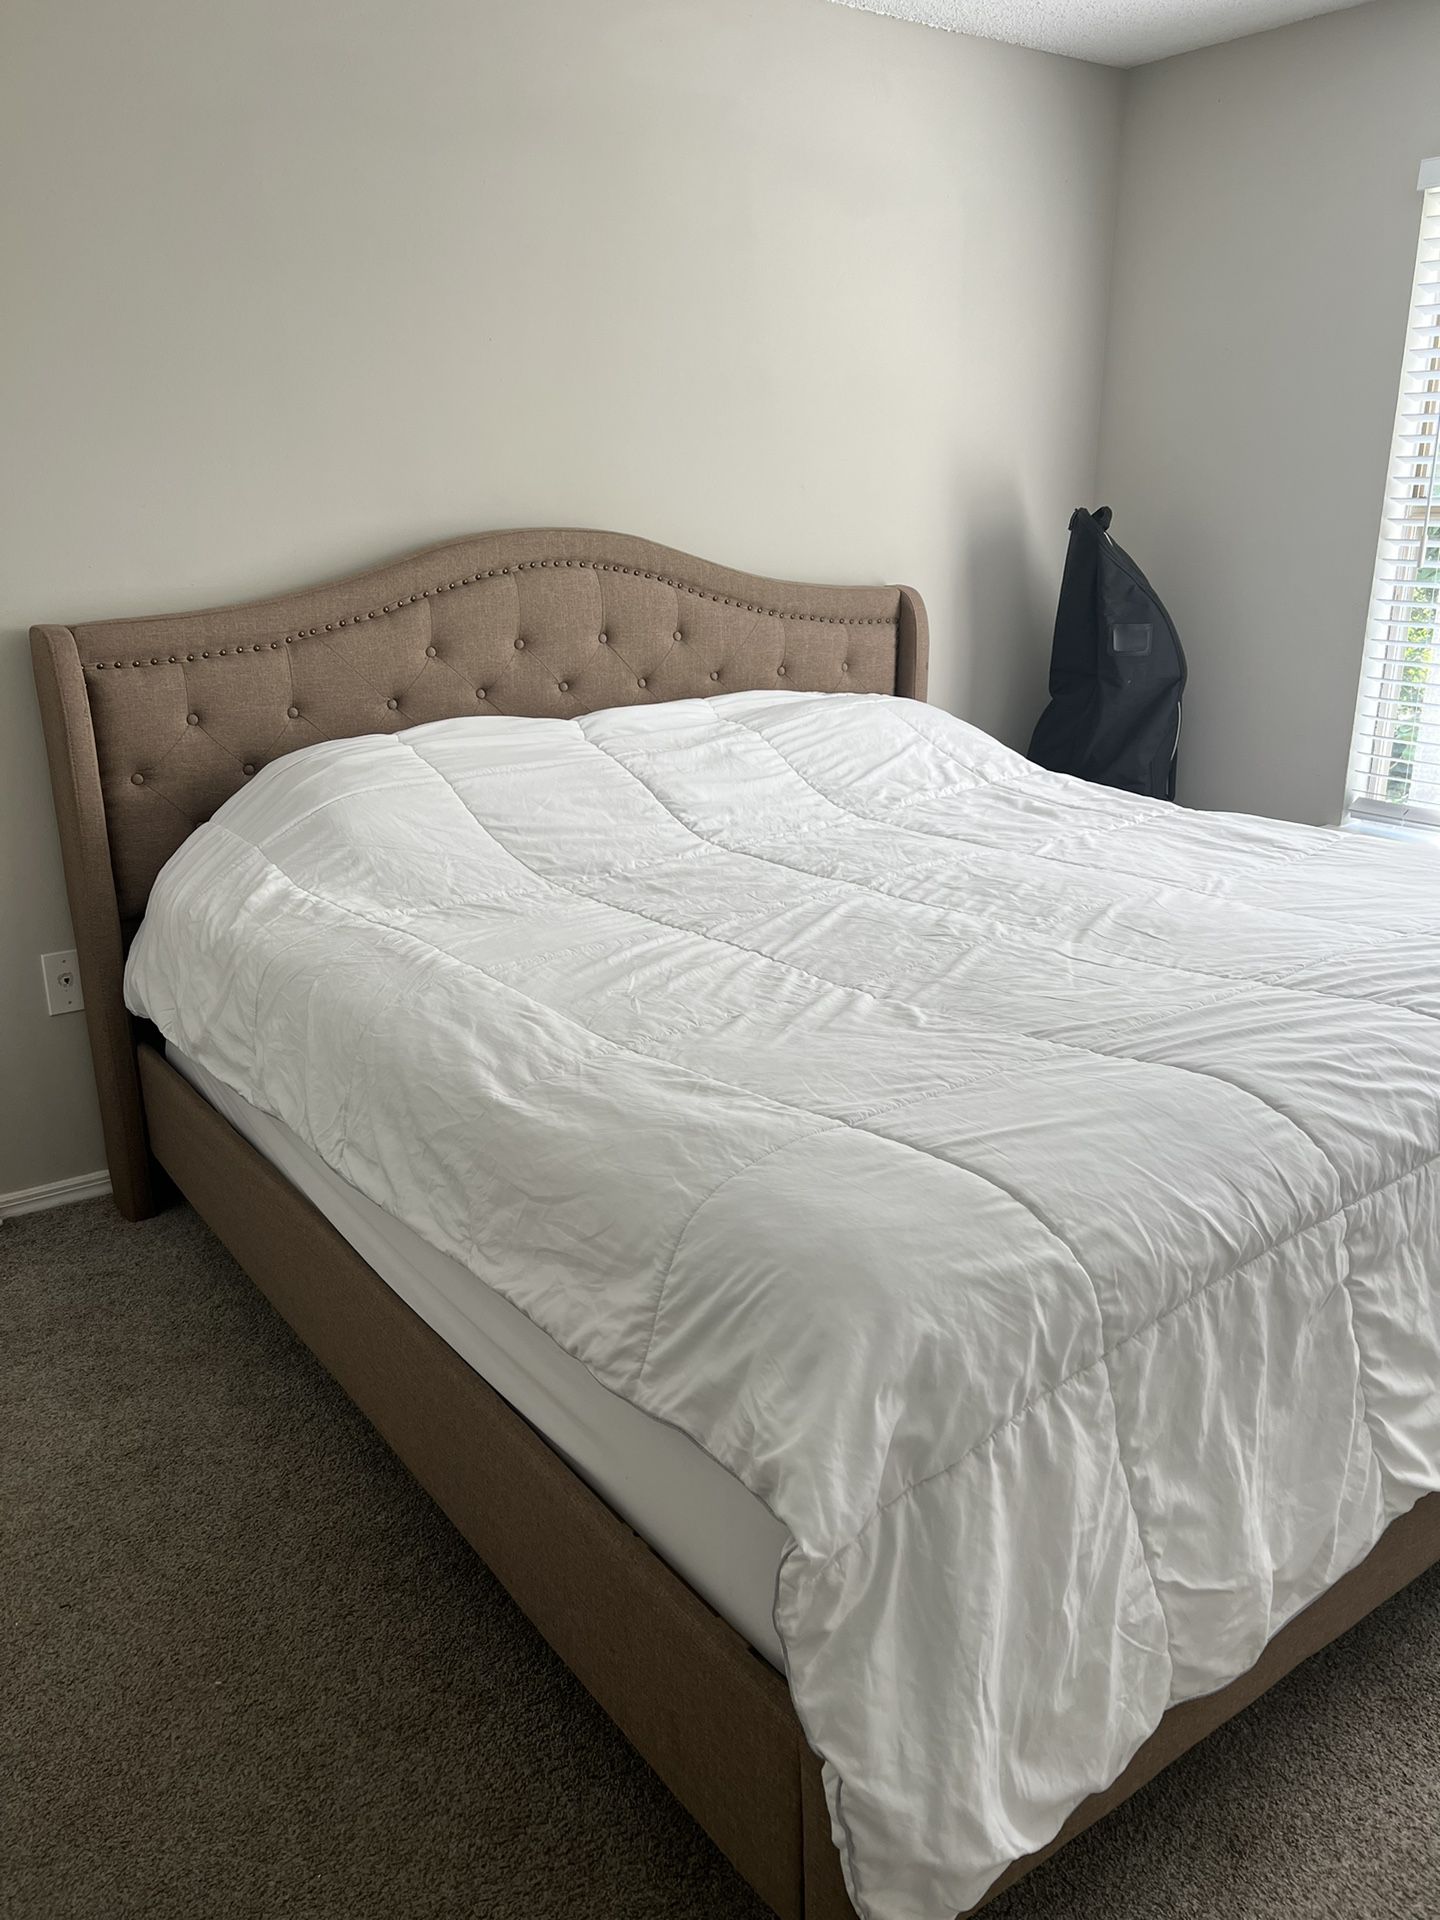 King Bed Frame, Box Spring, And Mattress 